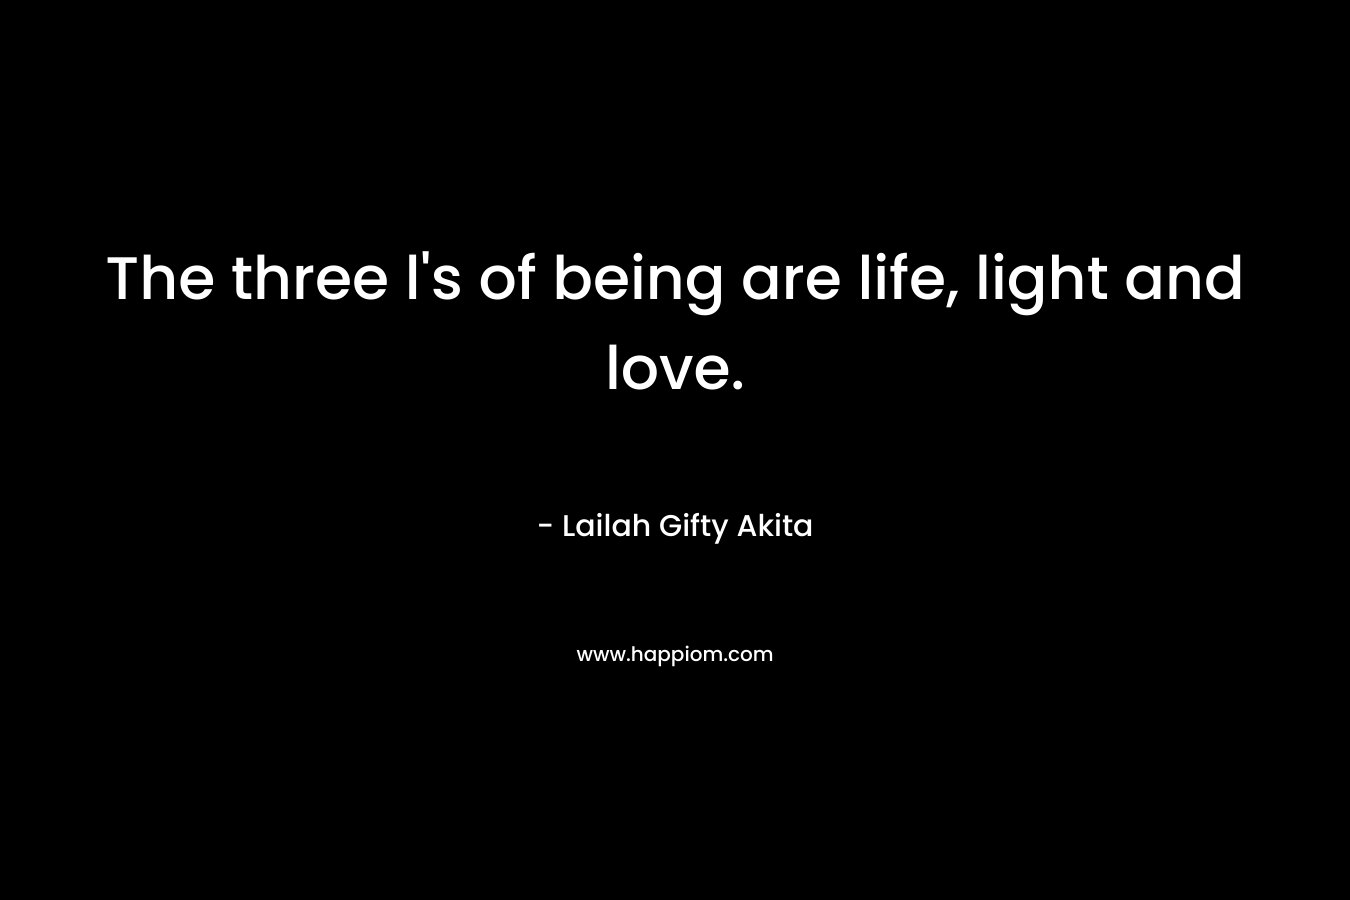 The three l's of being are life, light and love.